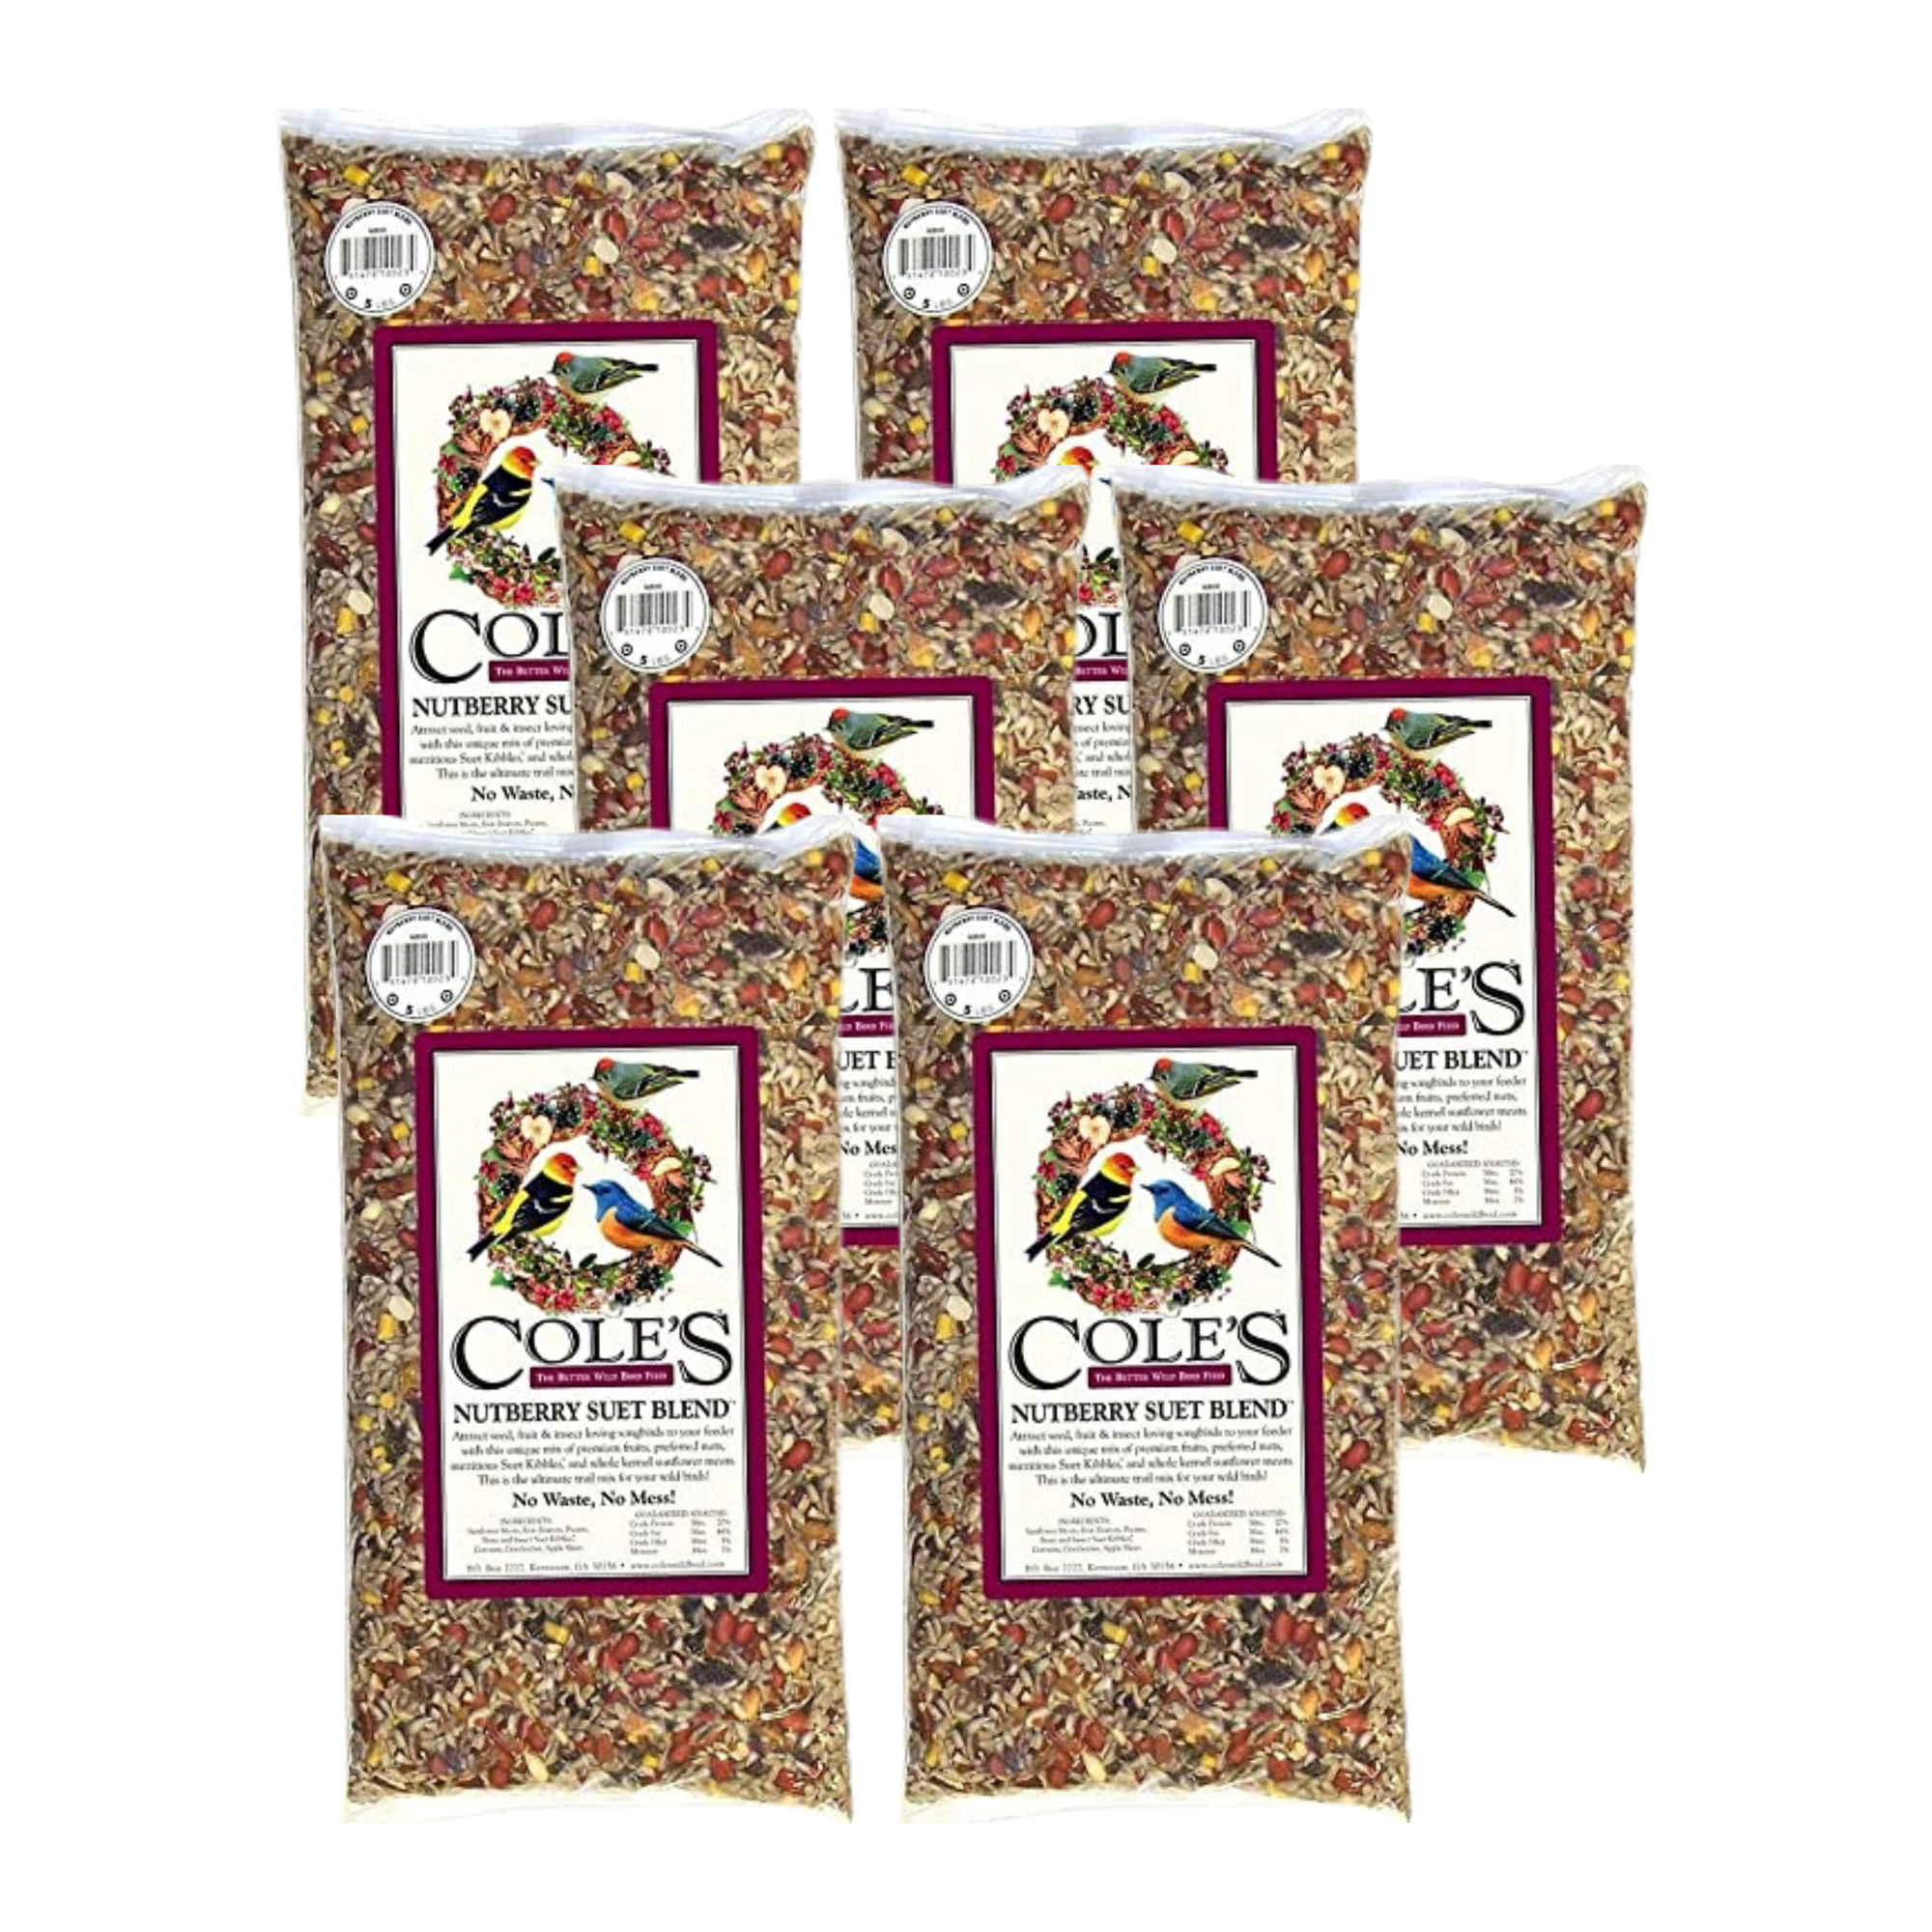 Cole's NB05 Nutberry Suet Blend Bird Seed, 5 lbs (6 Count)